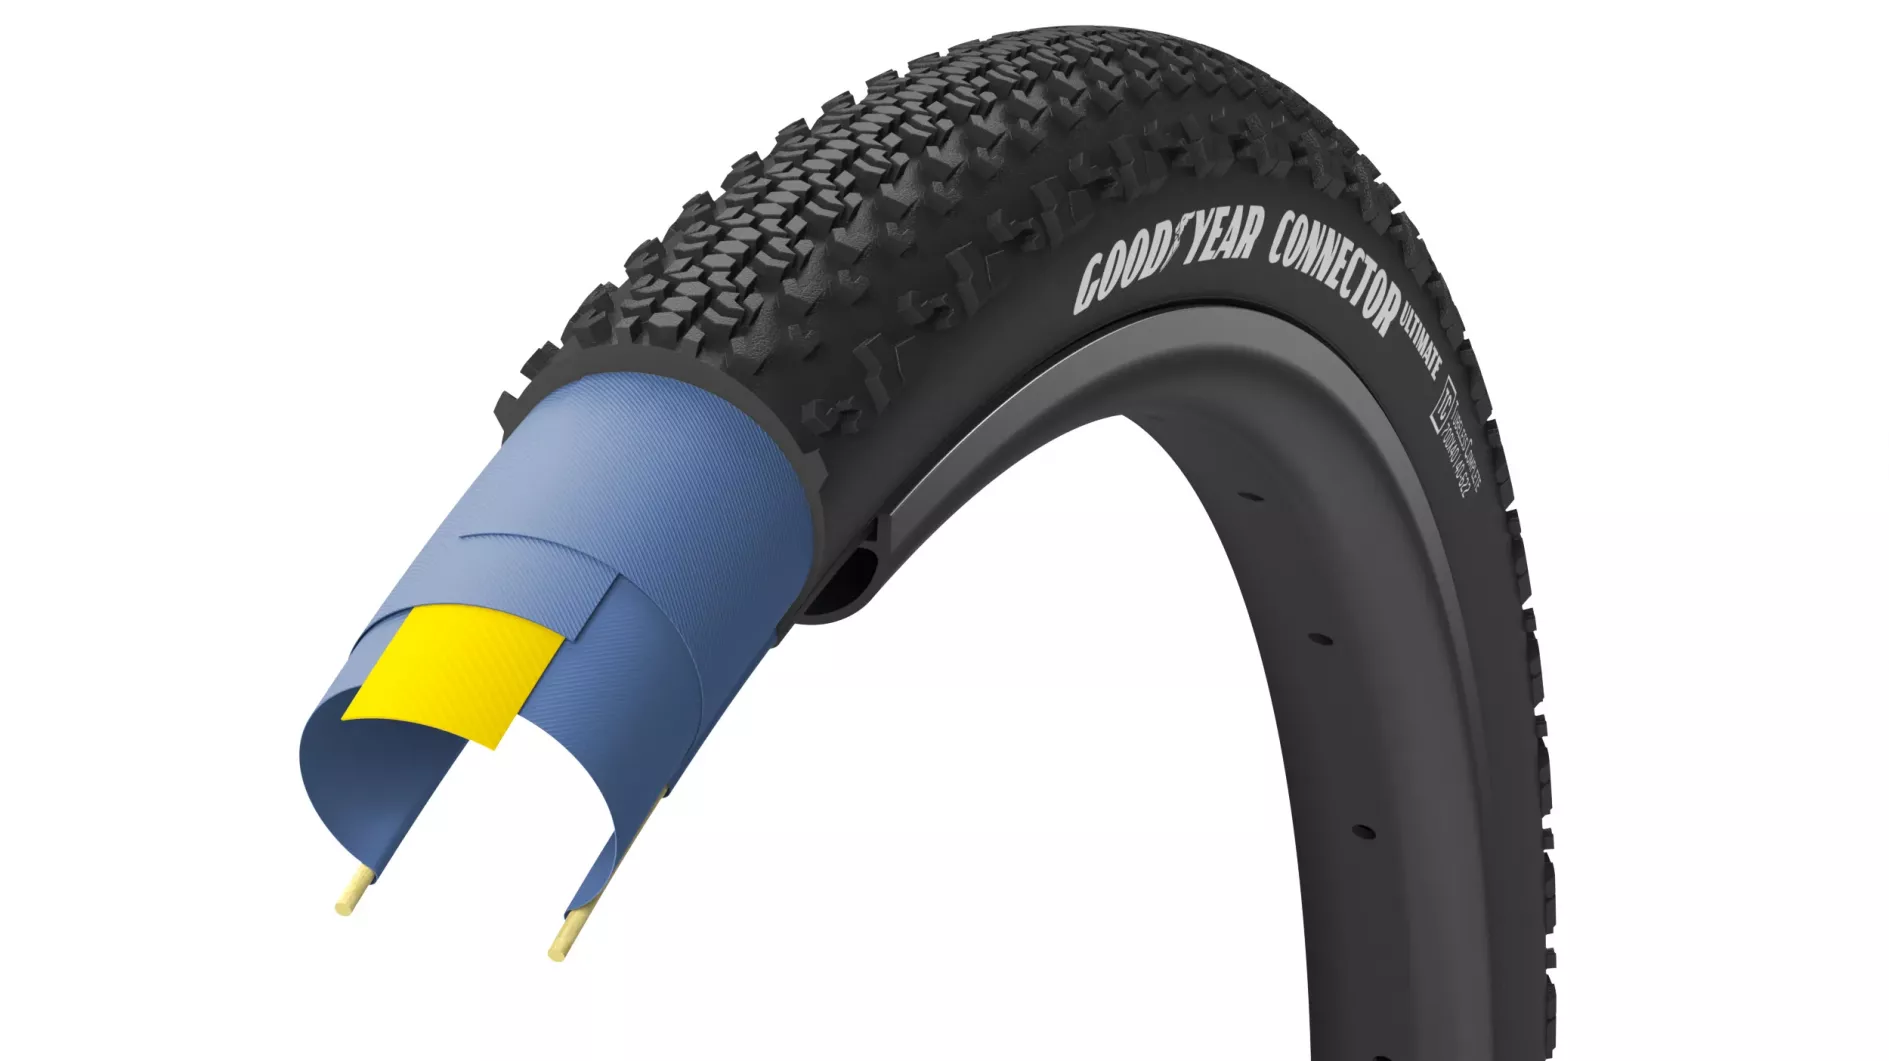 Фотографія Покришка GoodYear CONNECTOR tubeless complete 700x50 (50-622), folding, 120tpi, Чорна 